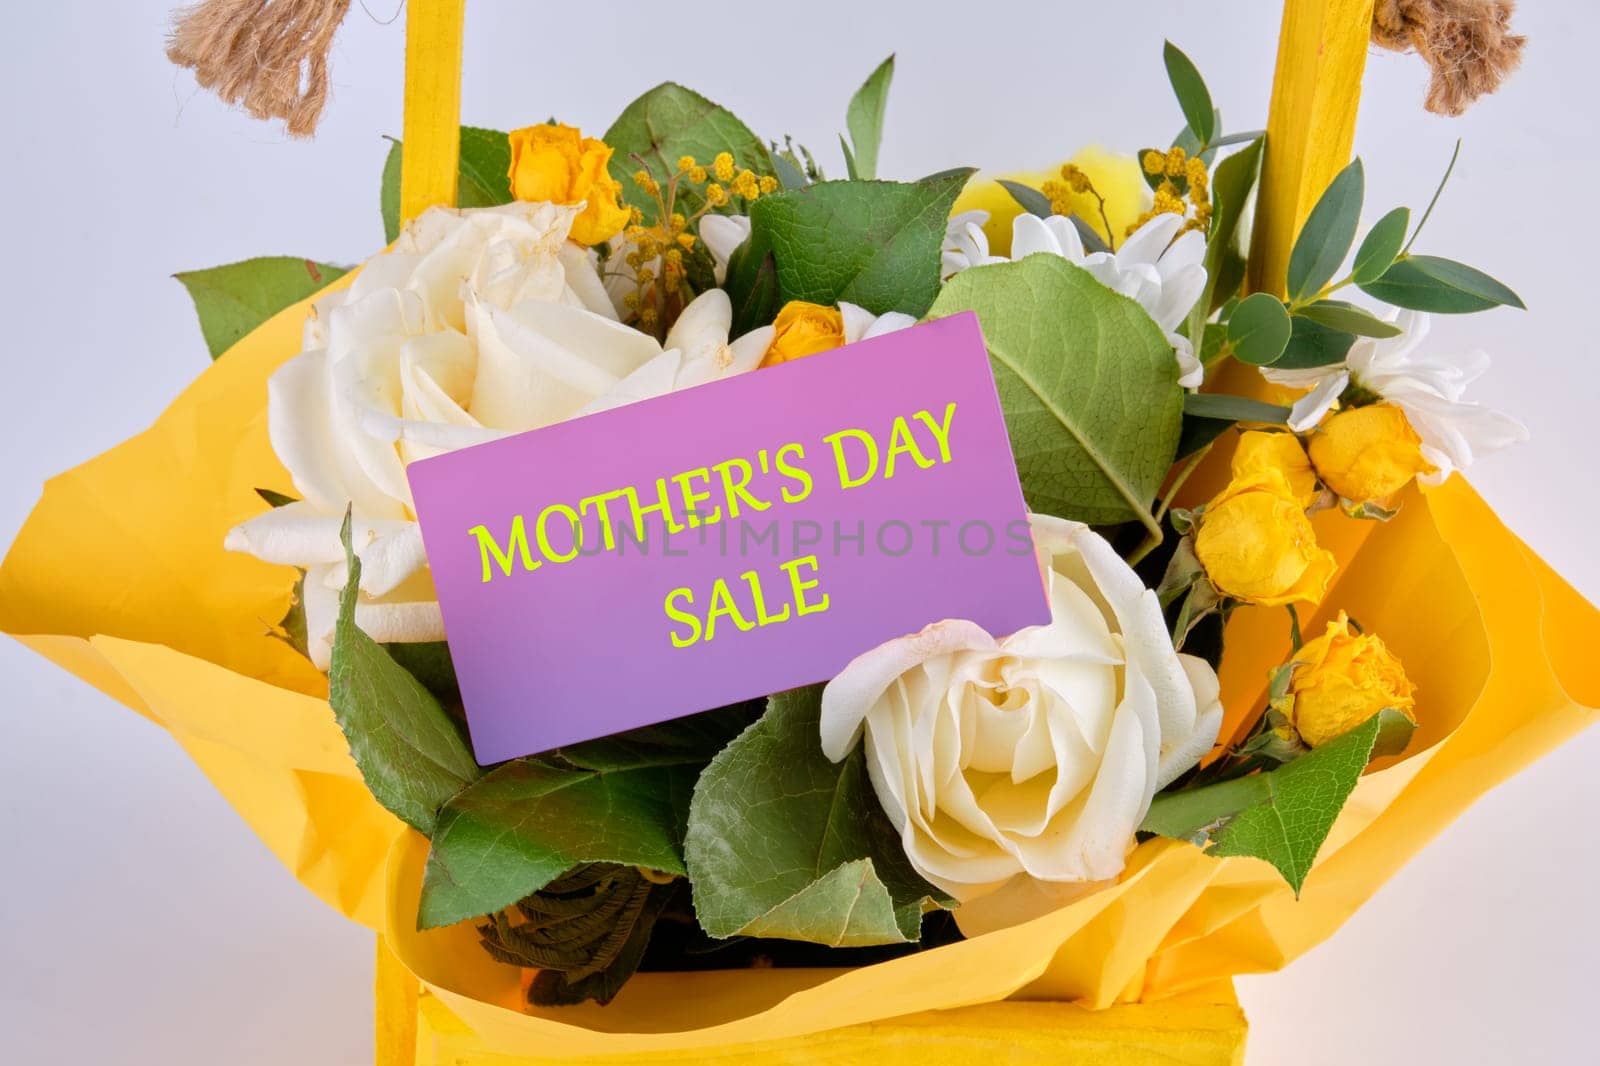 MOTHER'S DAY SALE text on a beautiful purple business card in bright green letters by Ihar